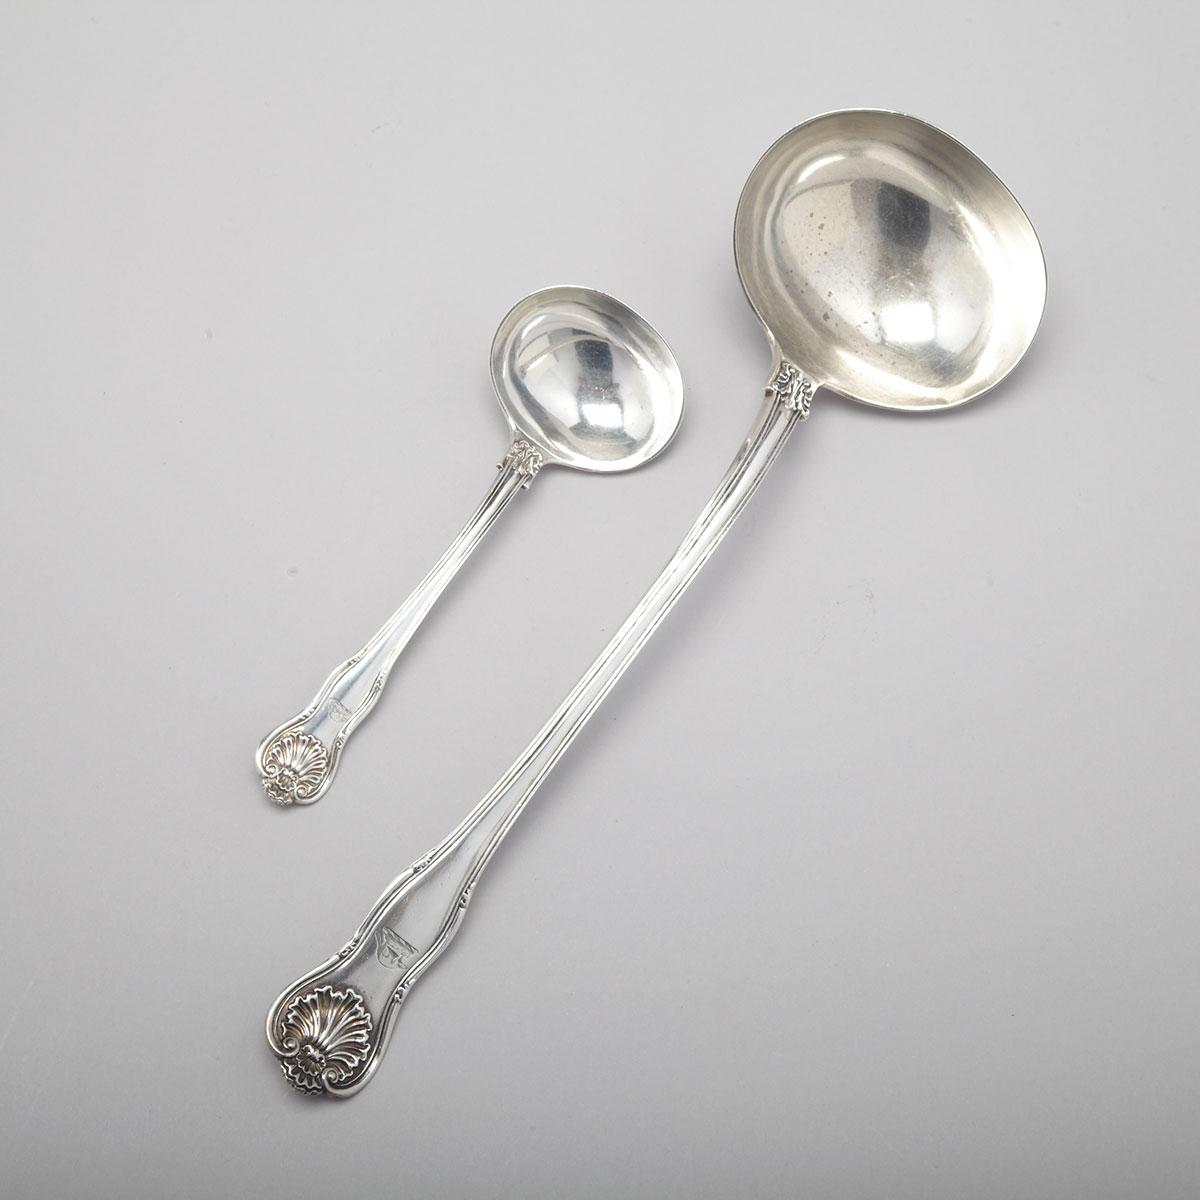 Victorian Silver Husk Pattern Soup Ladle and a Gravy Ladle, William Theobalds, London, 1841